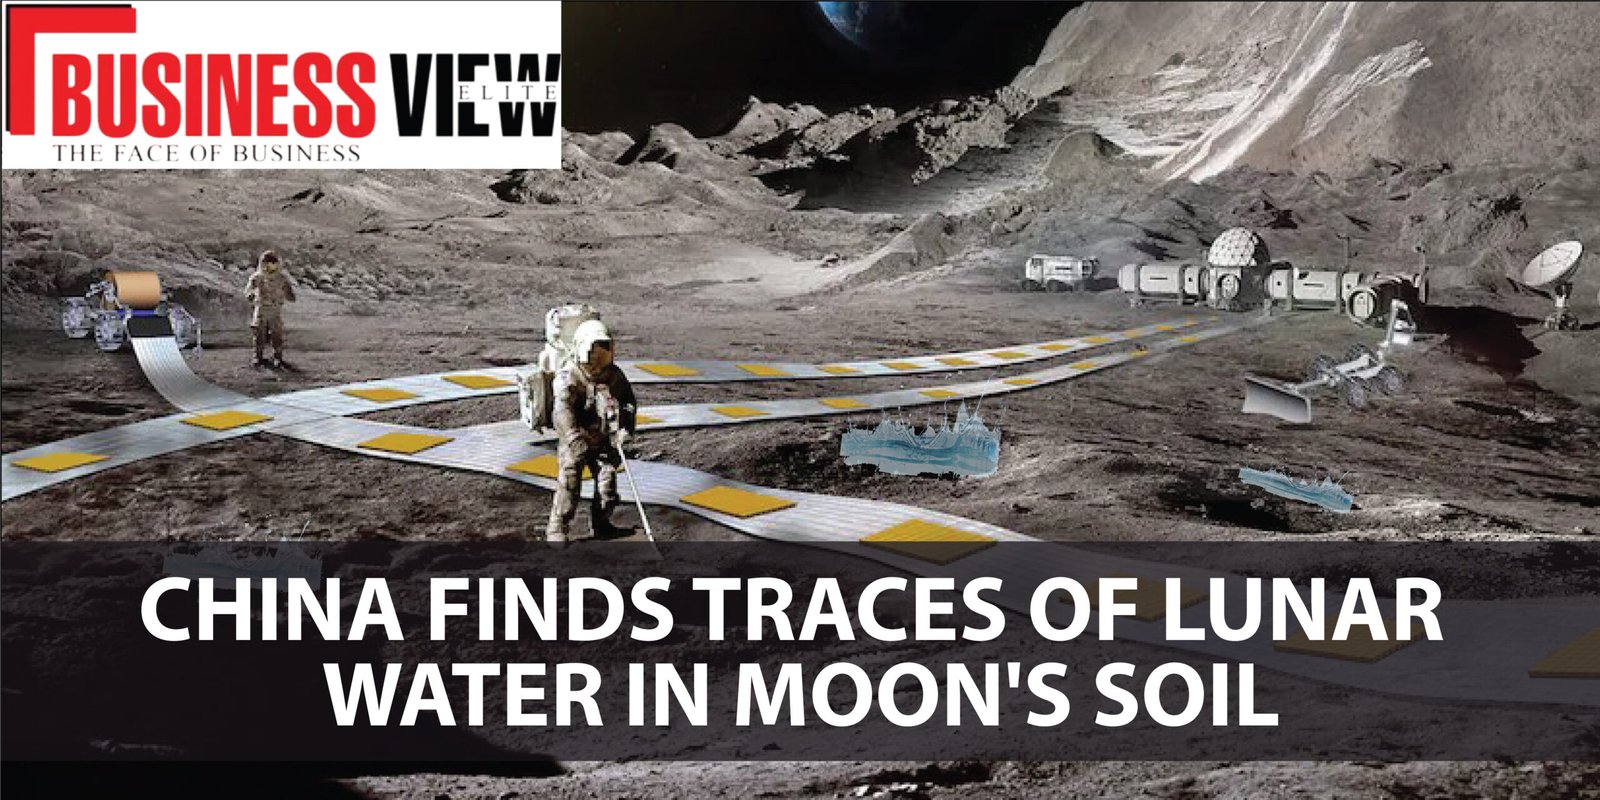 China finds traces of lunar water in the moon’s soil